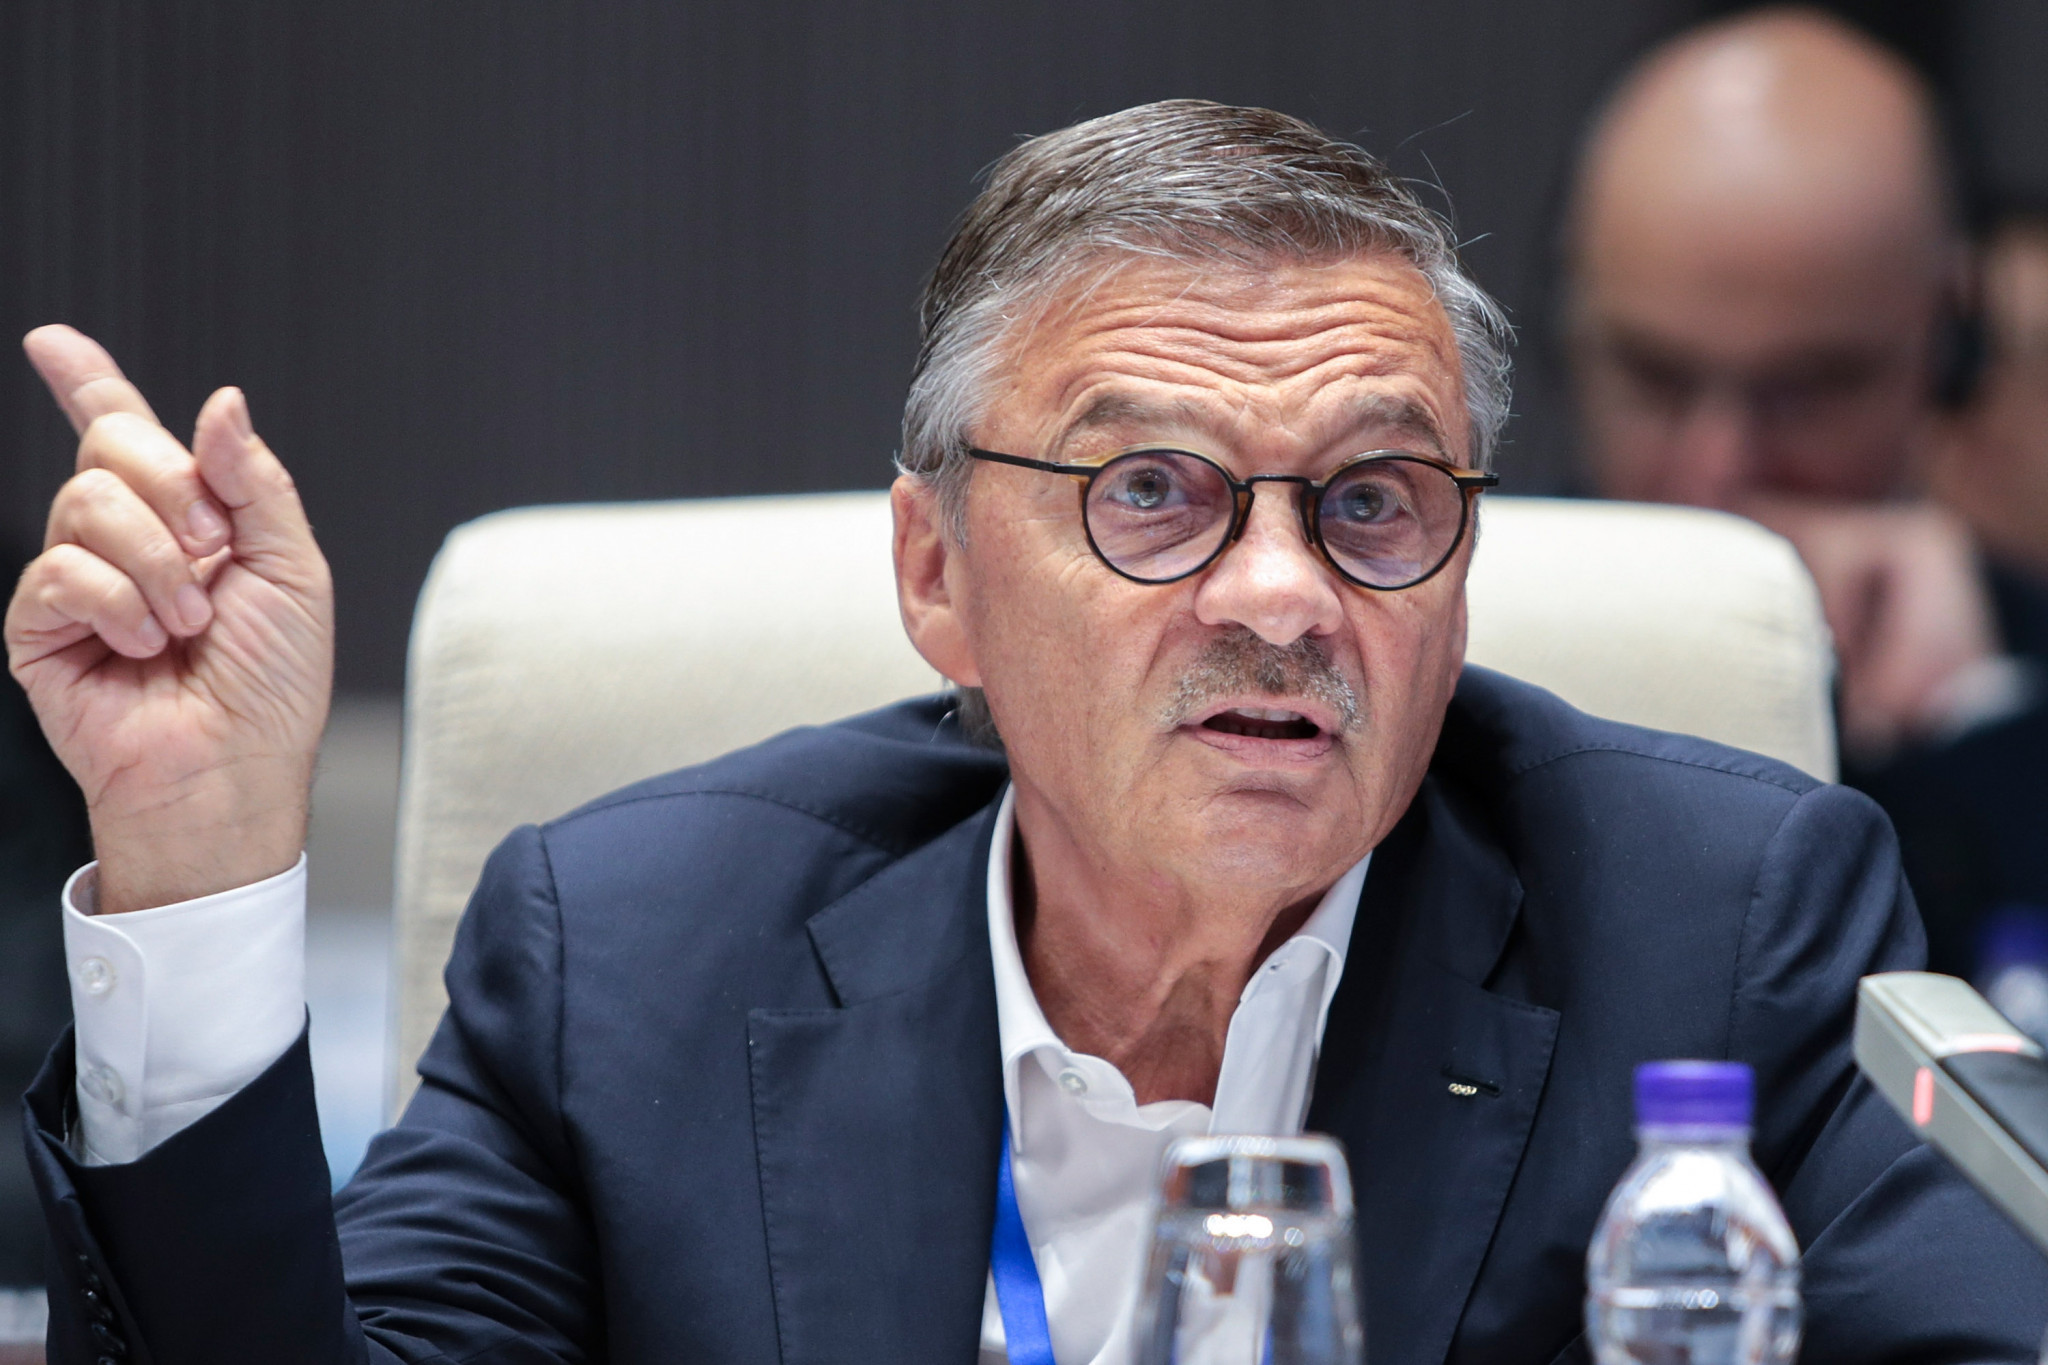 IIHF President René Fasel has been resistant to suggestions of holding the 2021 IIHF World Championships away from Belarus ©Getty Images